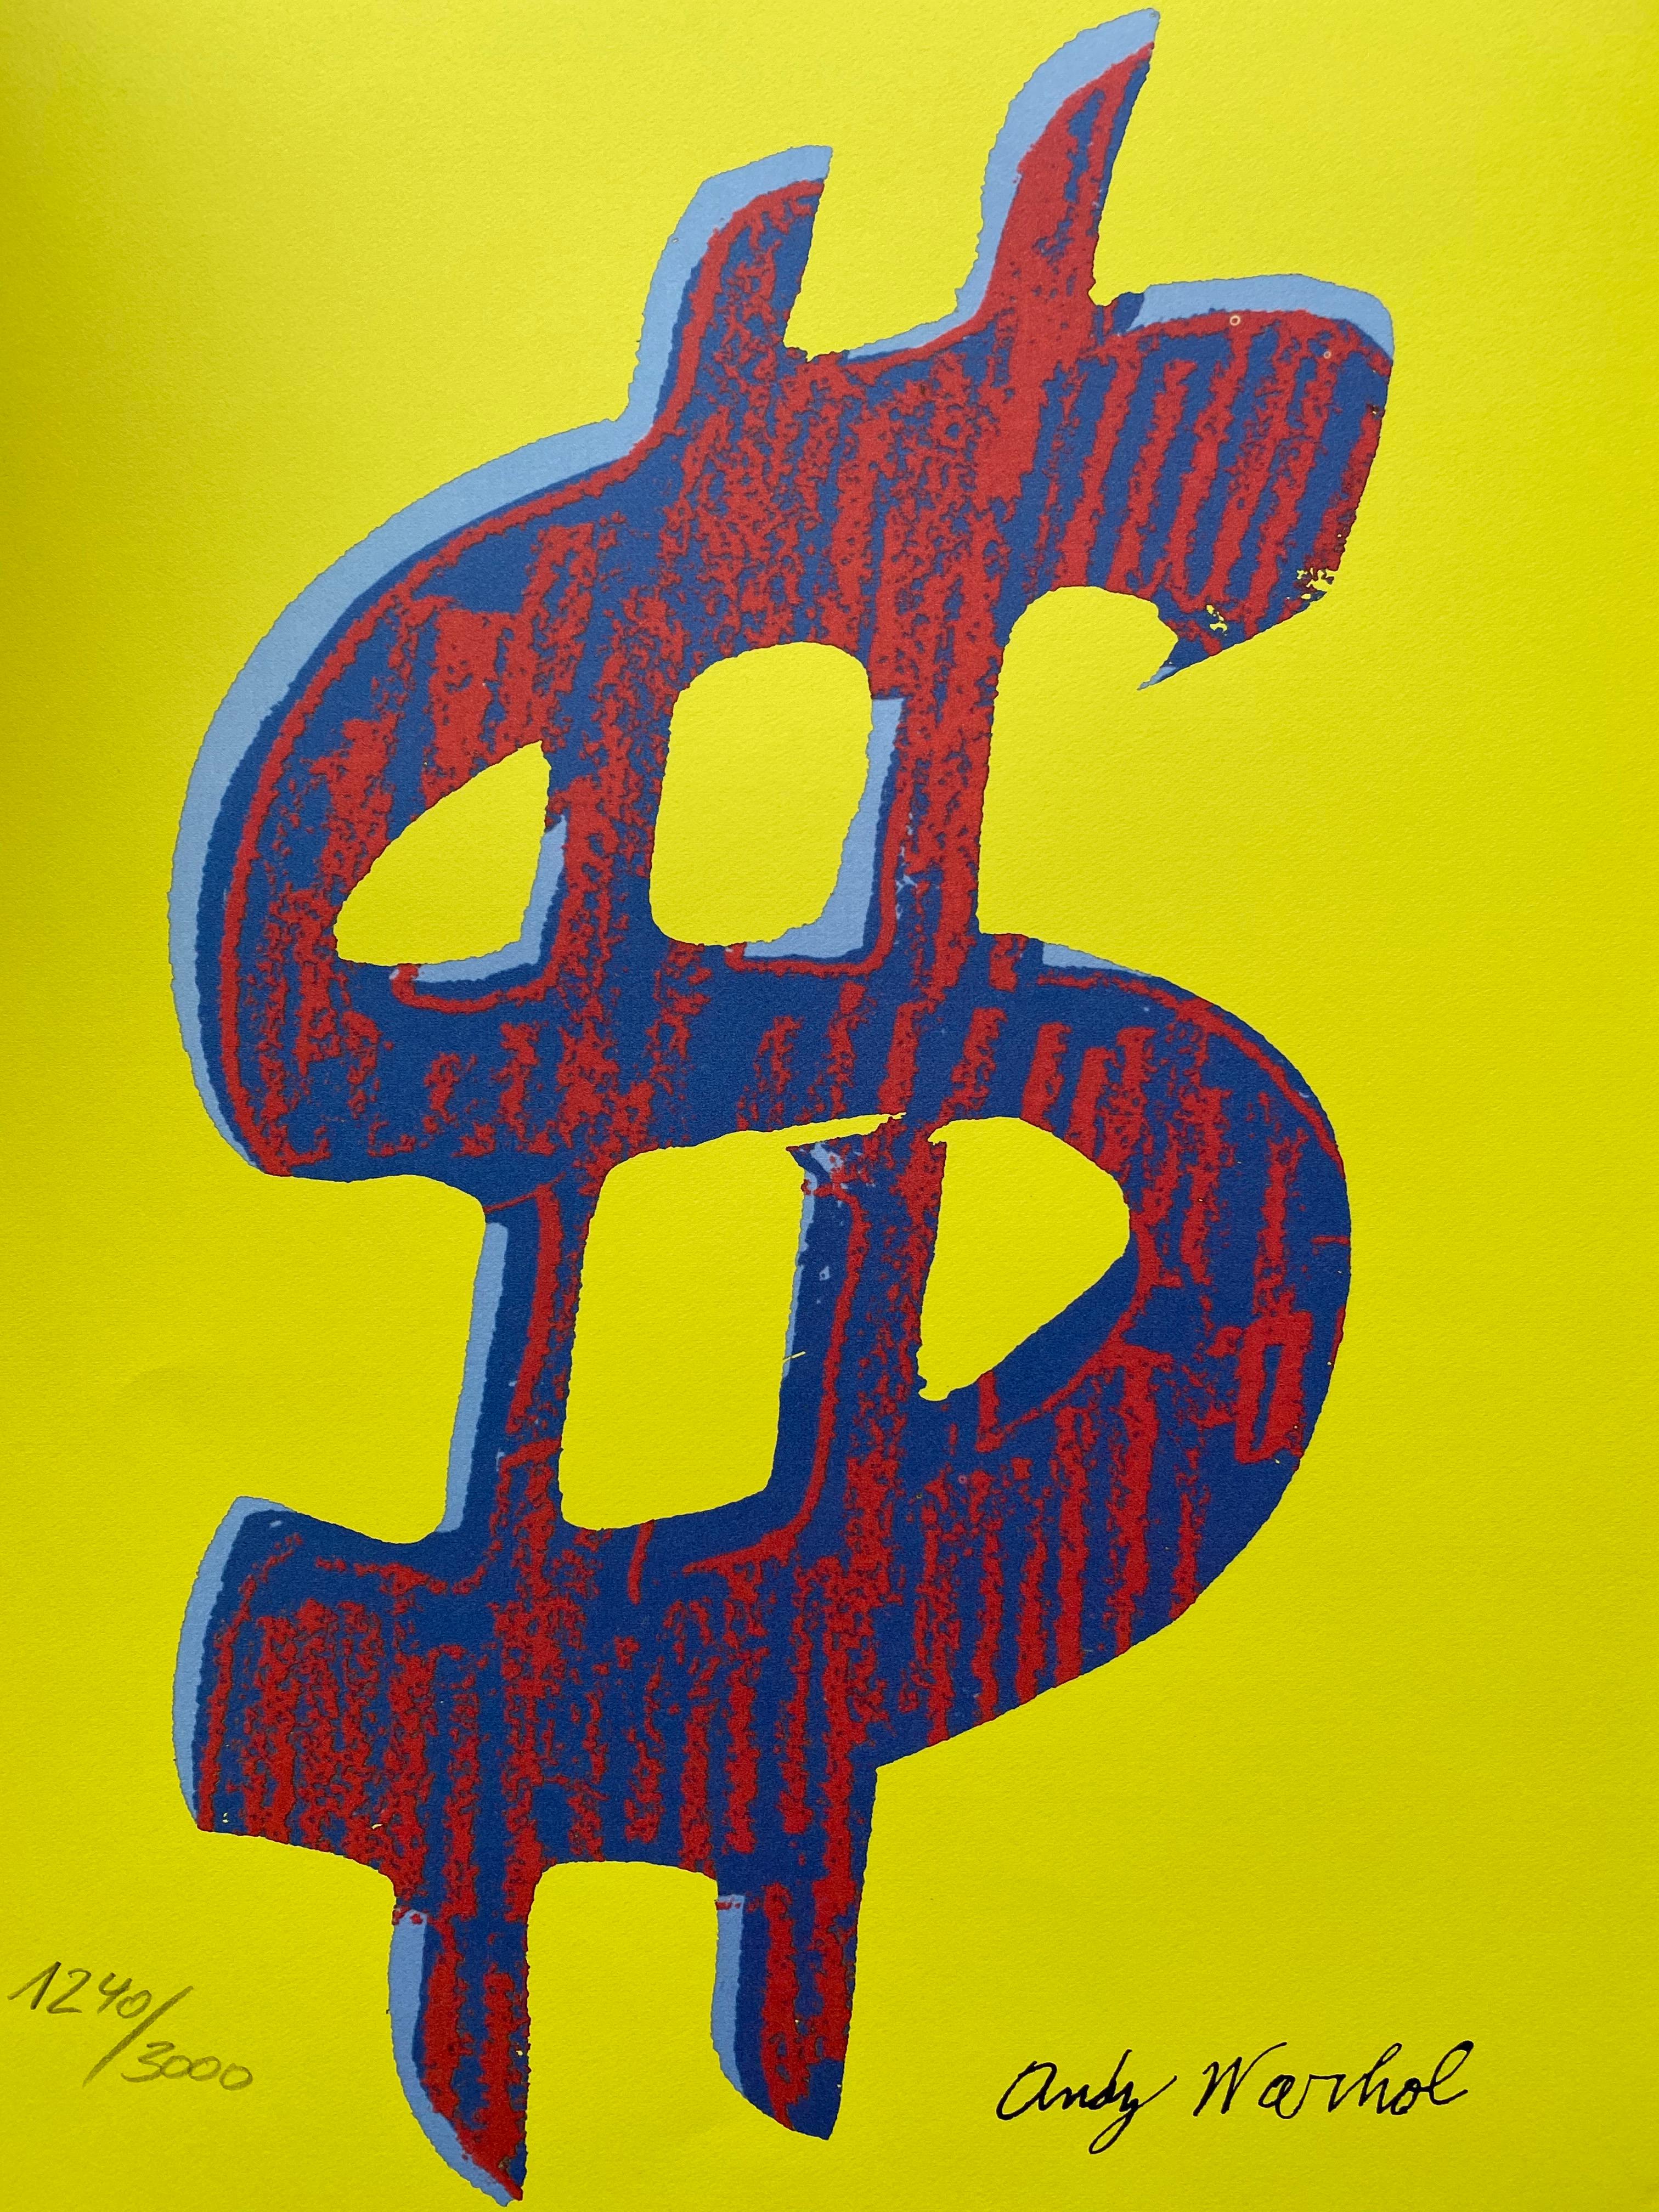 Granolithography Andy warhol "Red Dollar / yellow" - Mixed Media Art by Andy Warhol